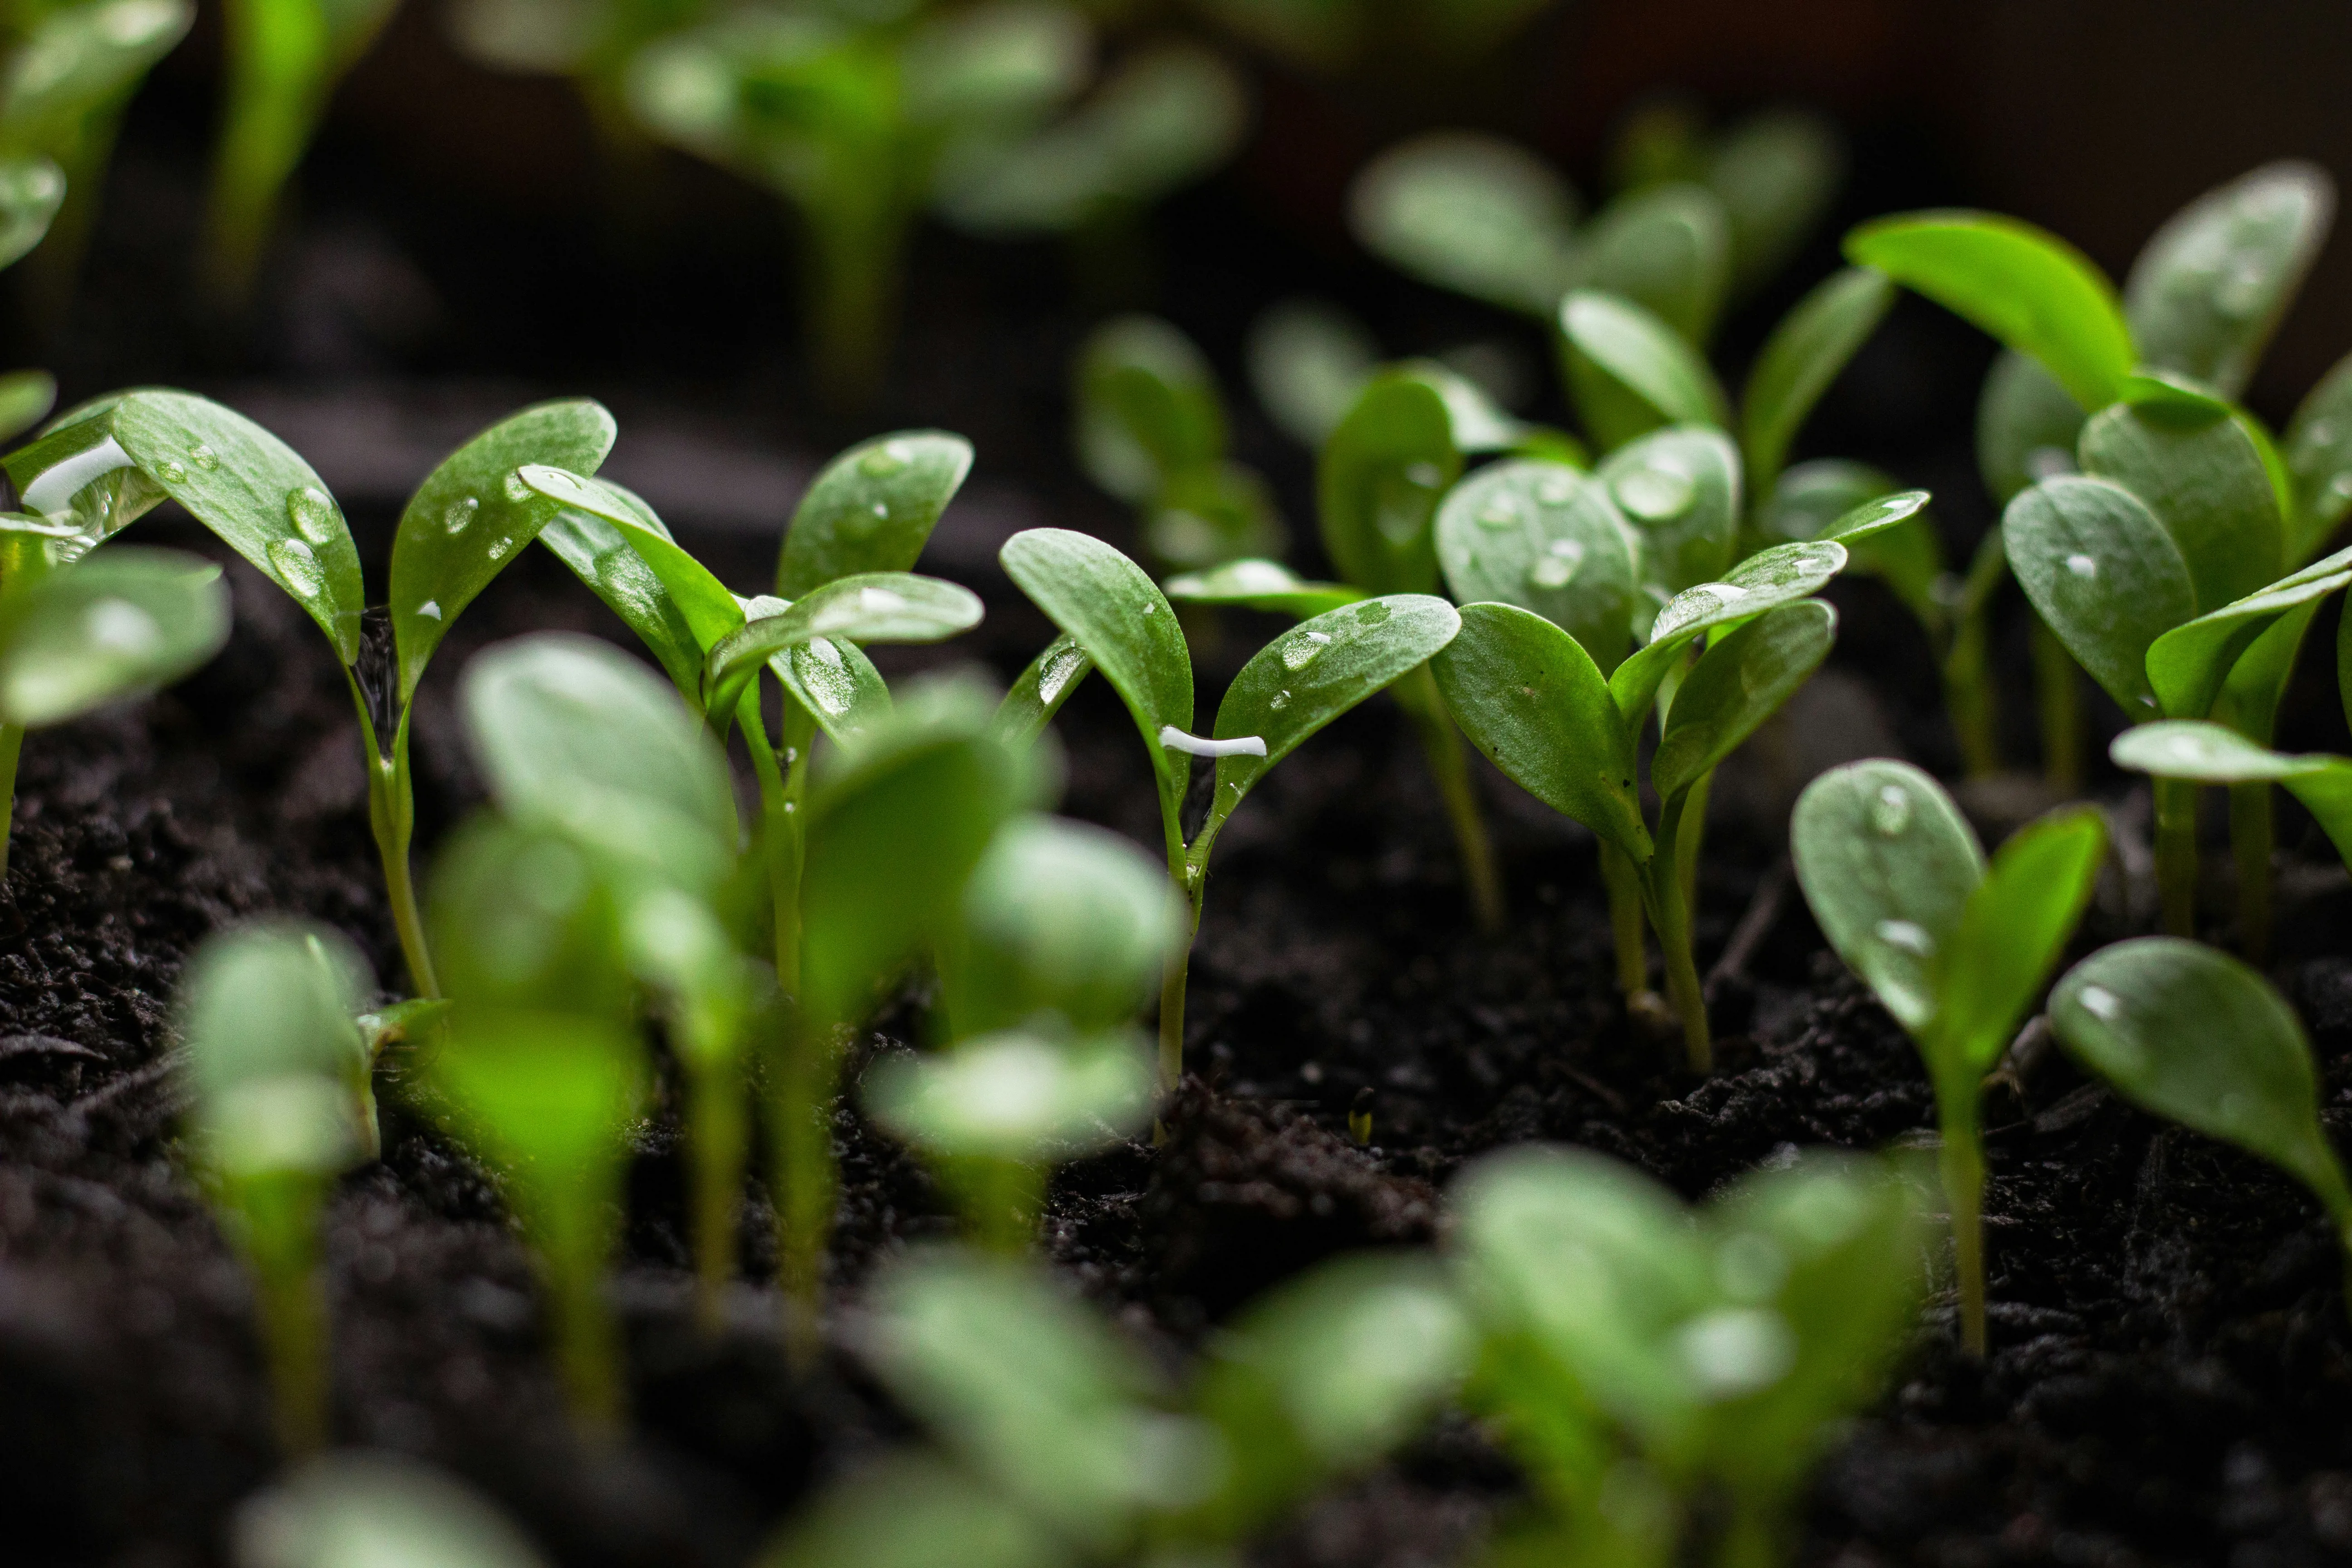 Young green seedlings with water droplets on them, dark soil behind.